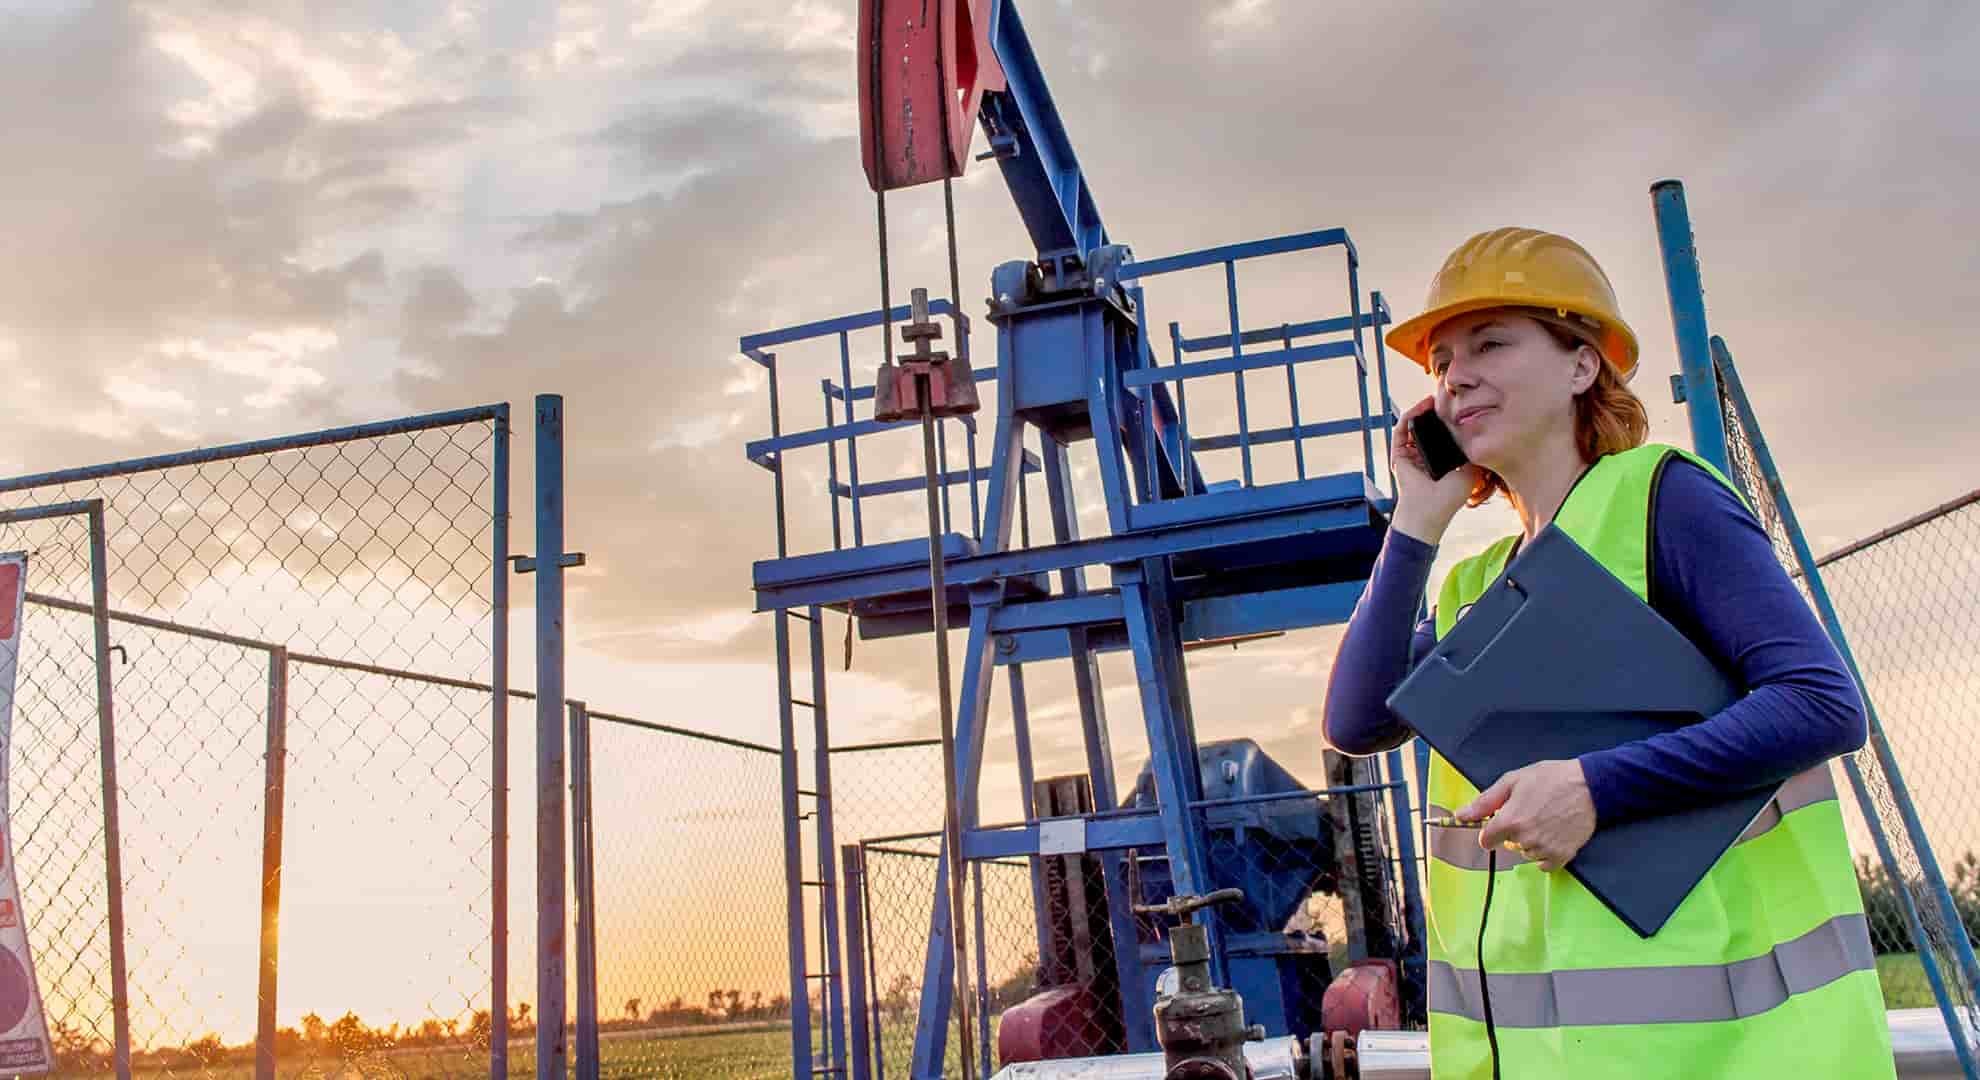 Woman engineer at oil field making a phone call